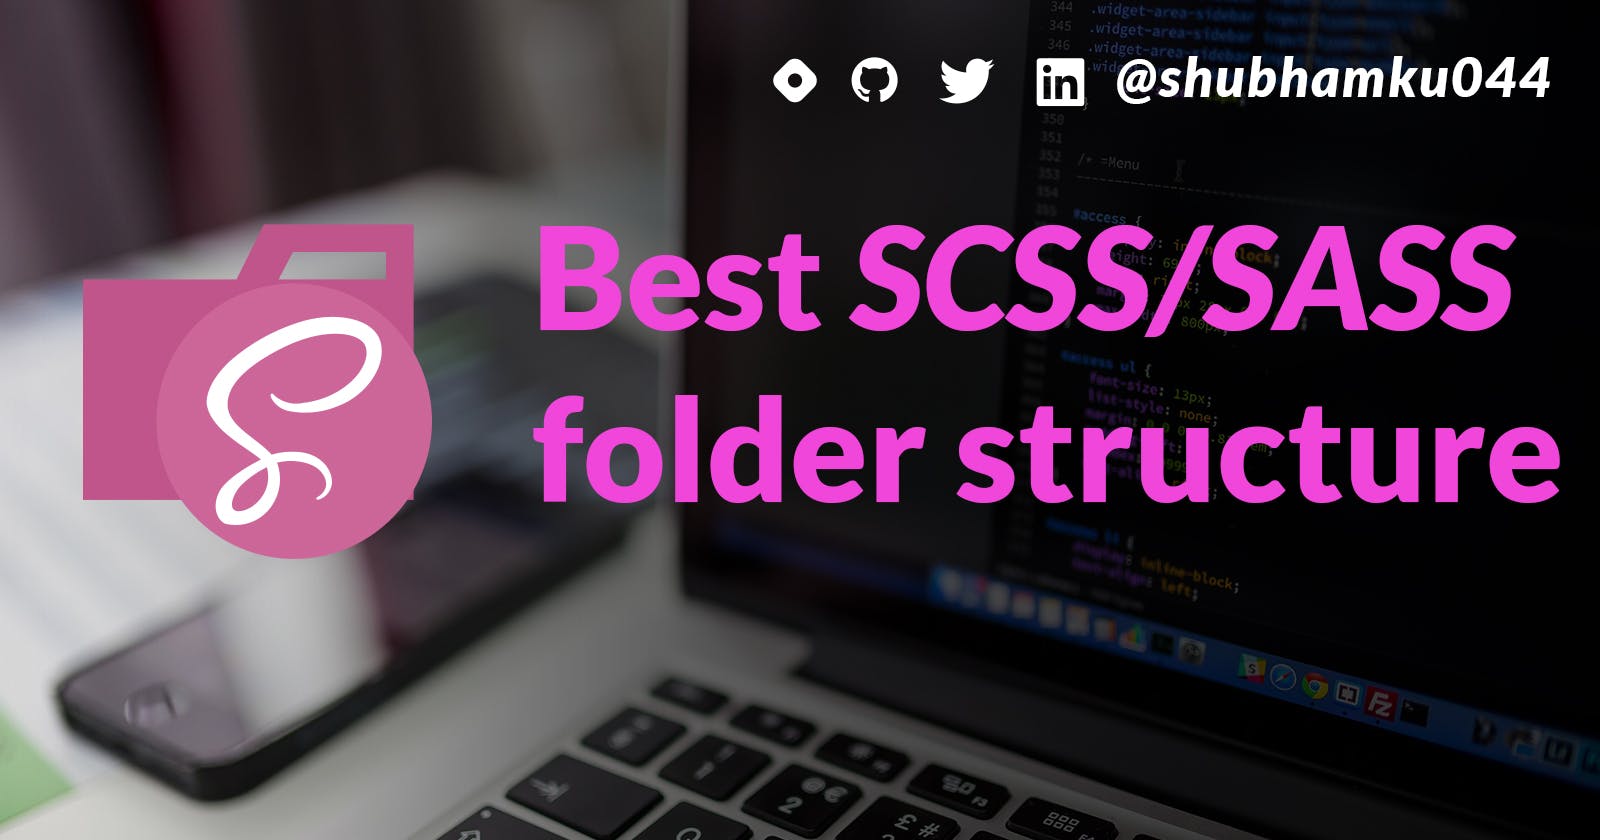 Best folder structure for SCSS/SASS